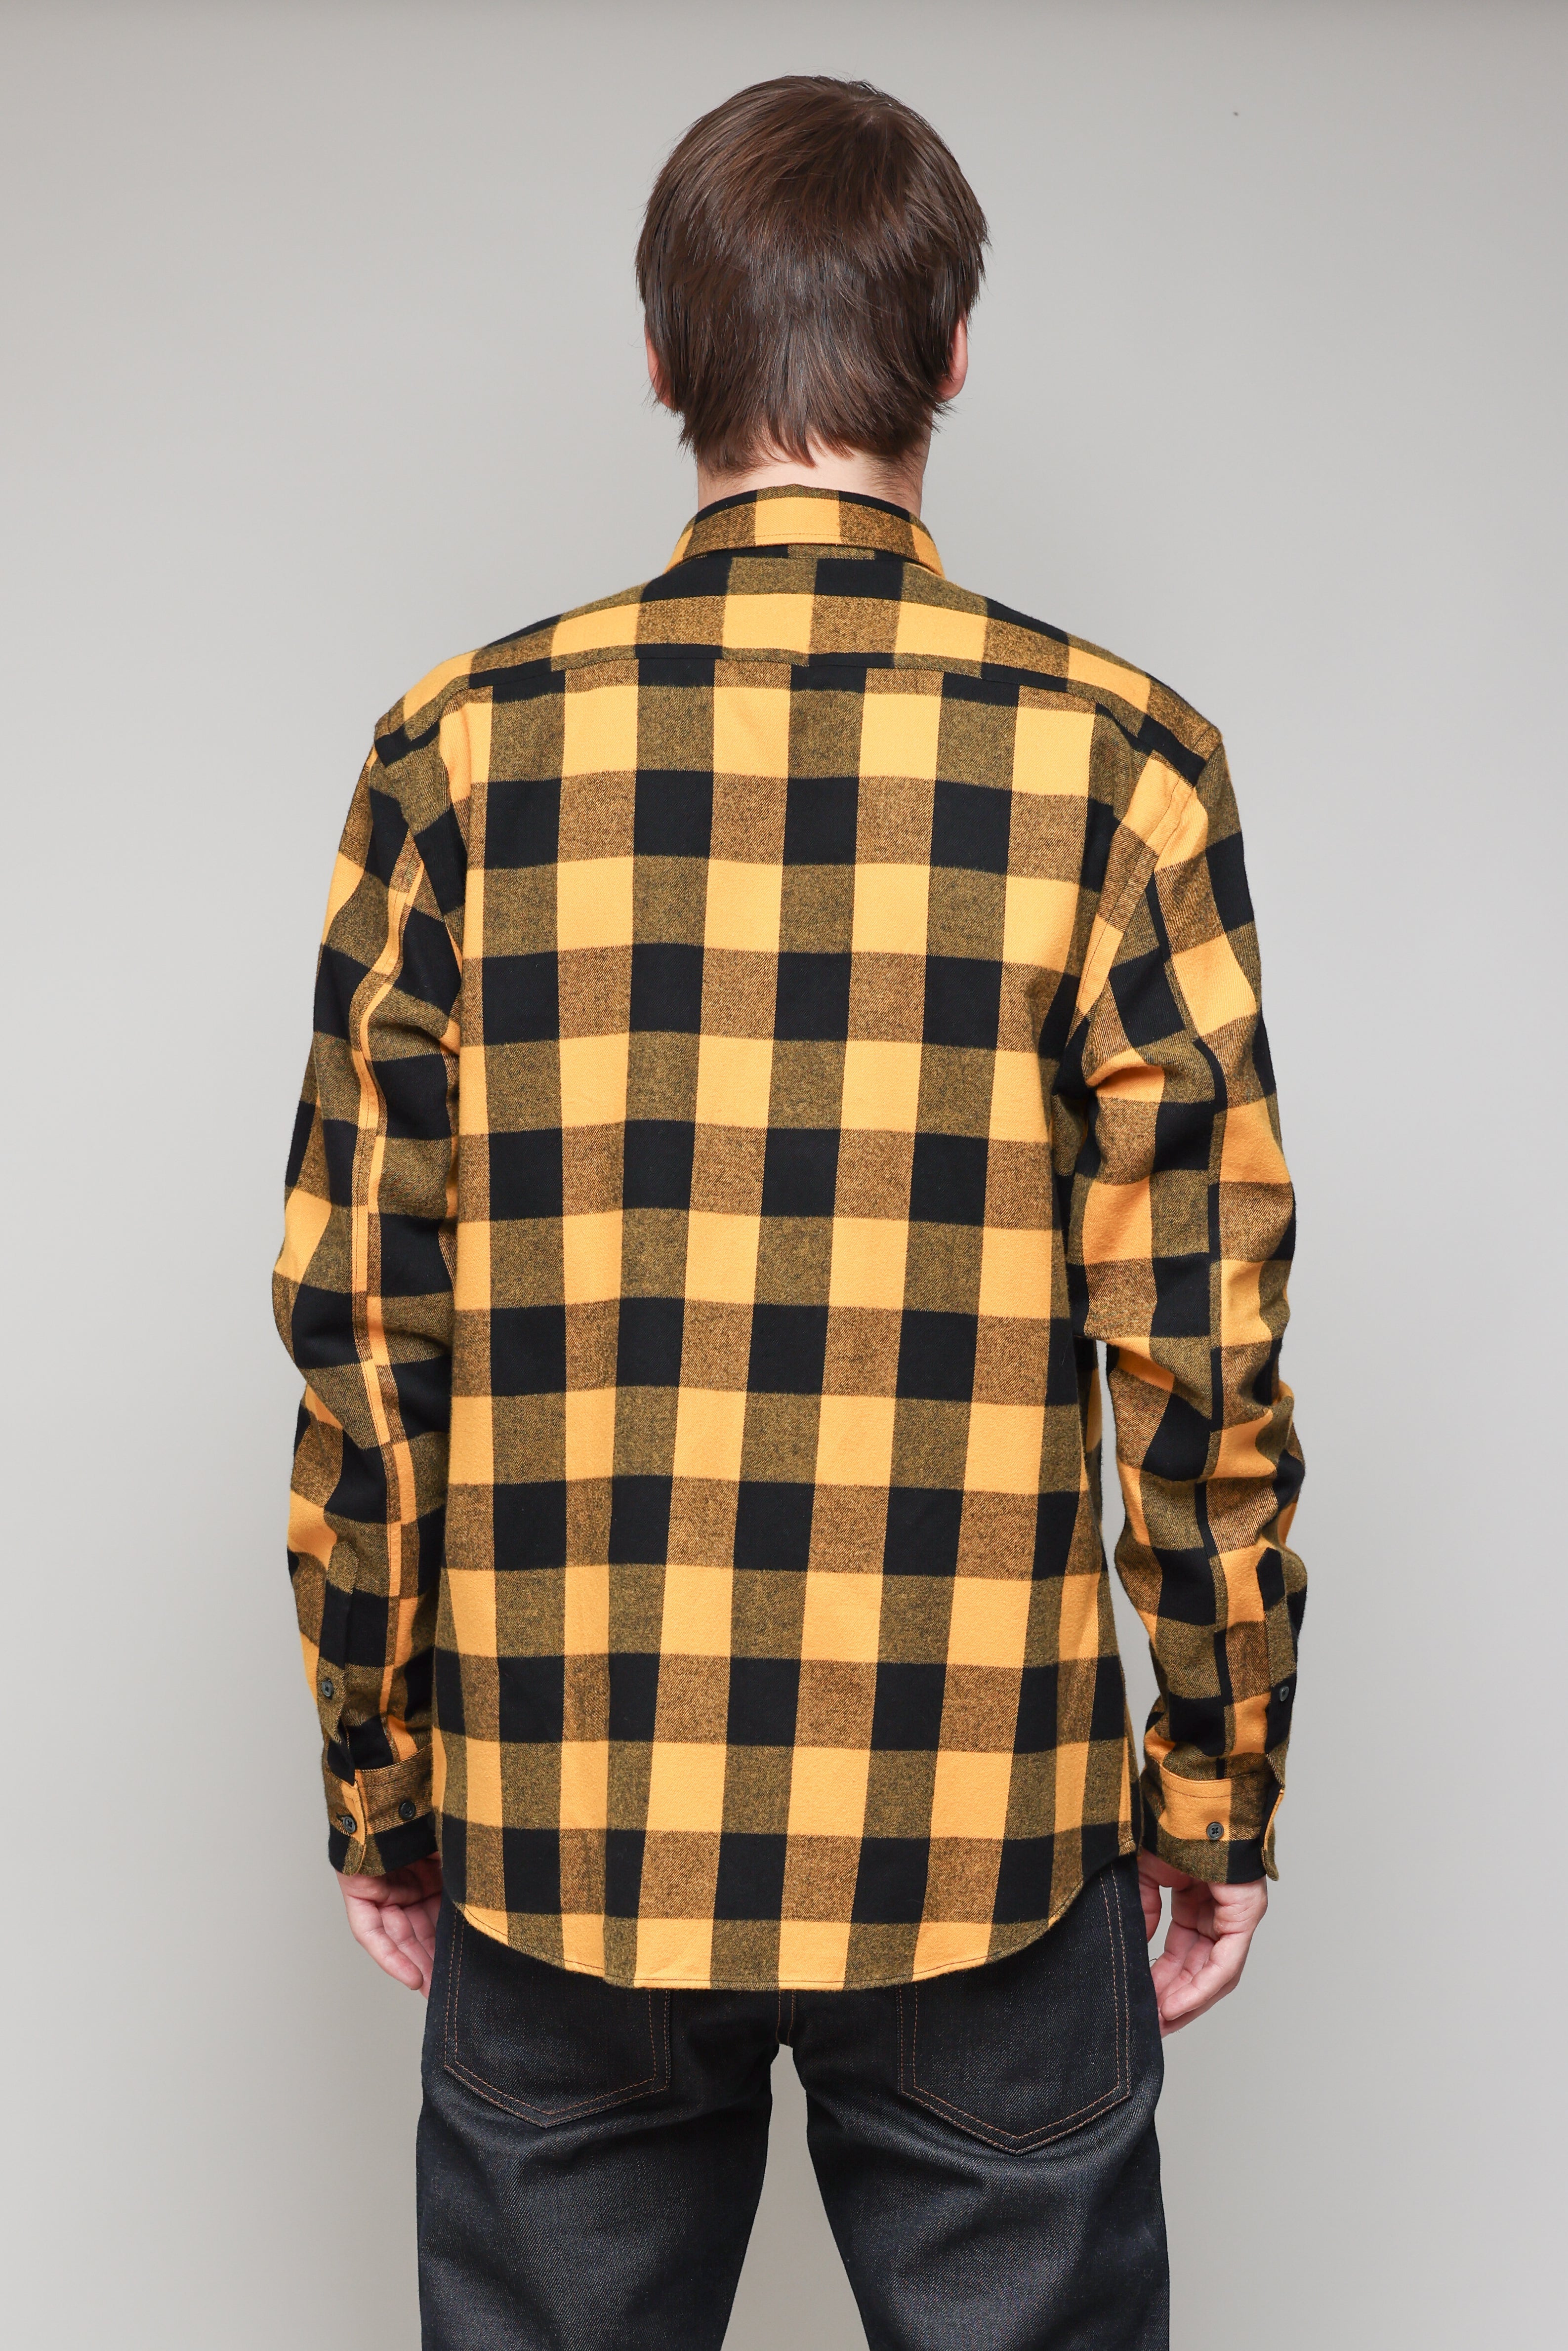 Japanese Brushed Buffalo Plaid in Yellow and Black 04